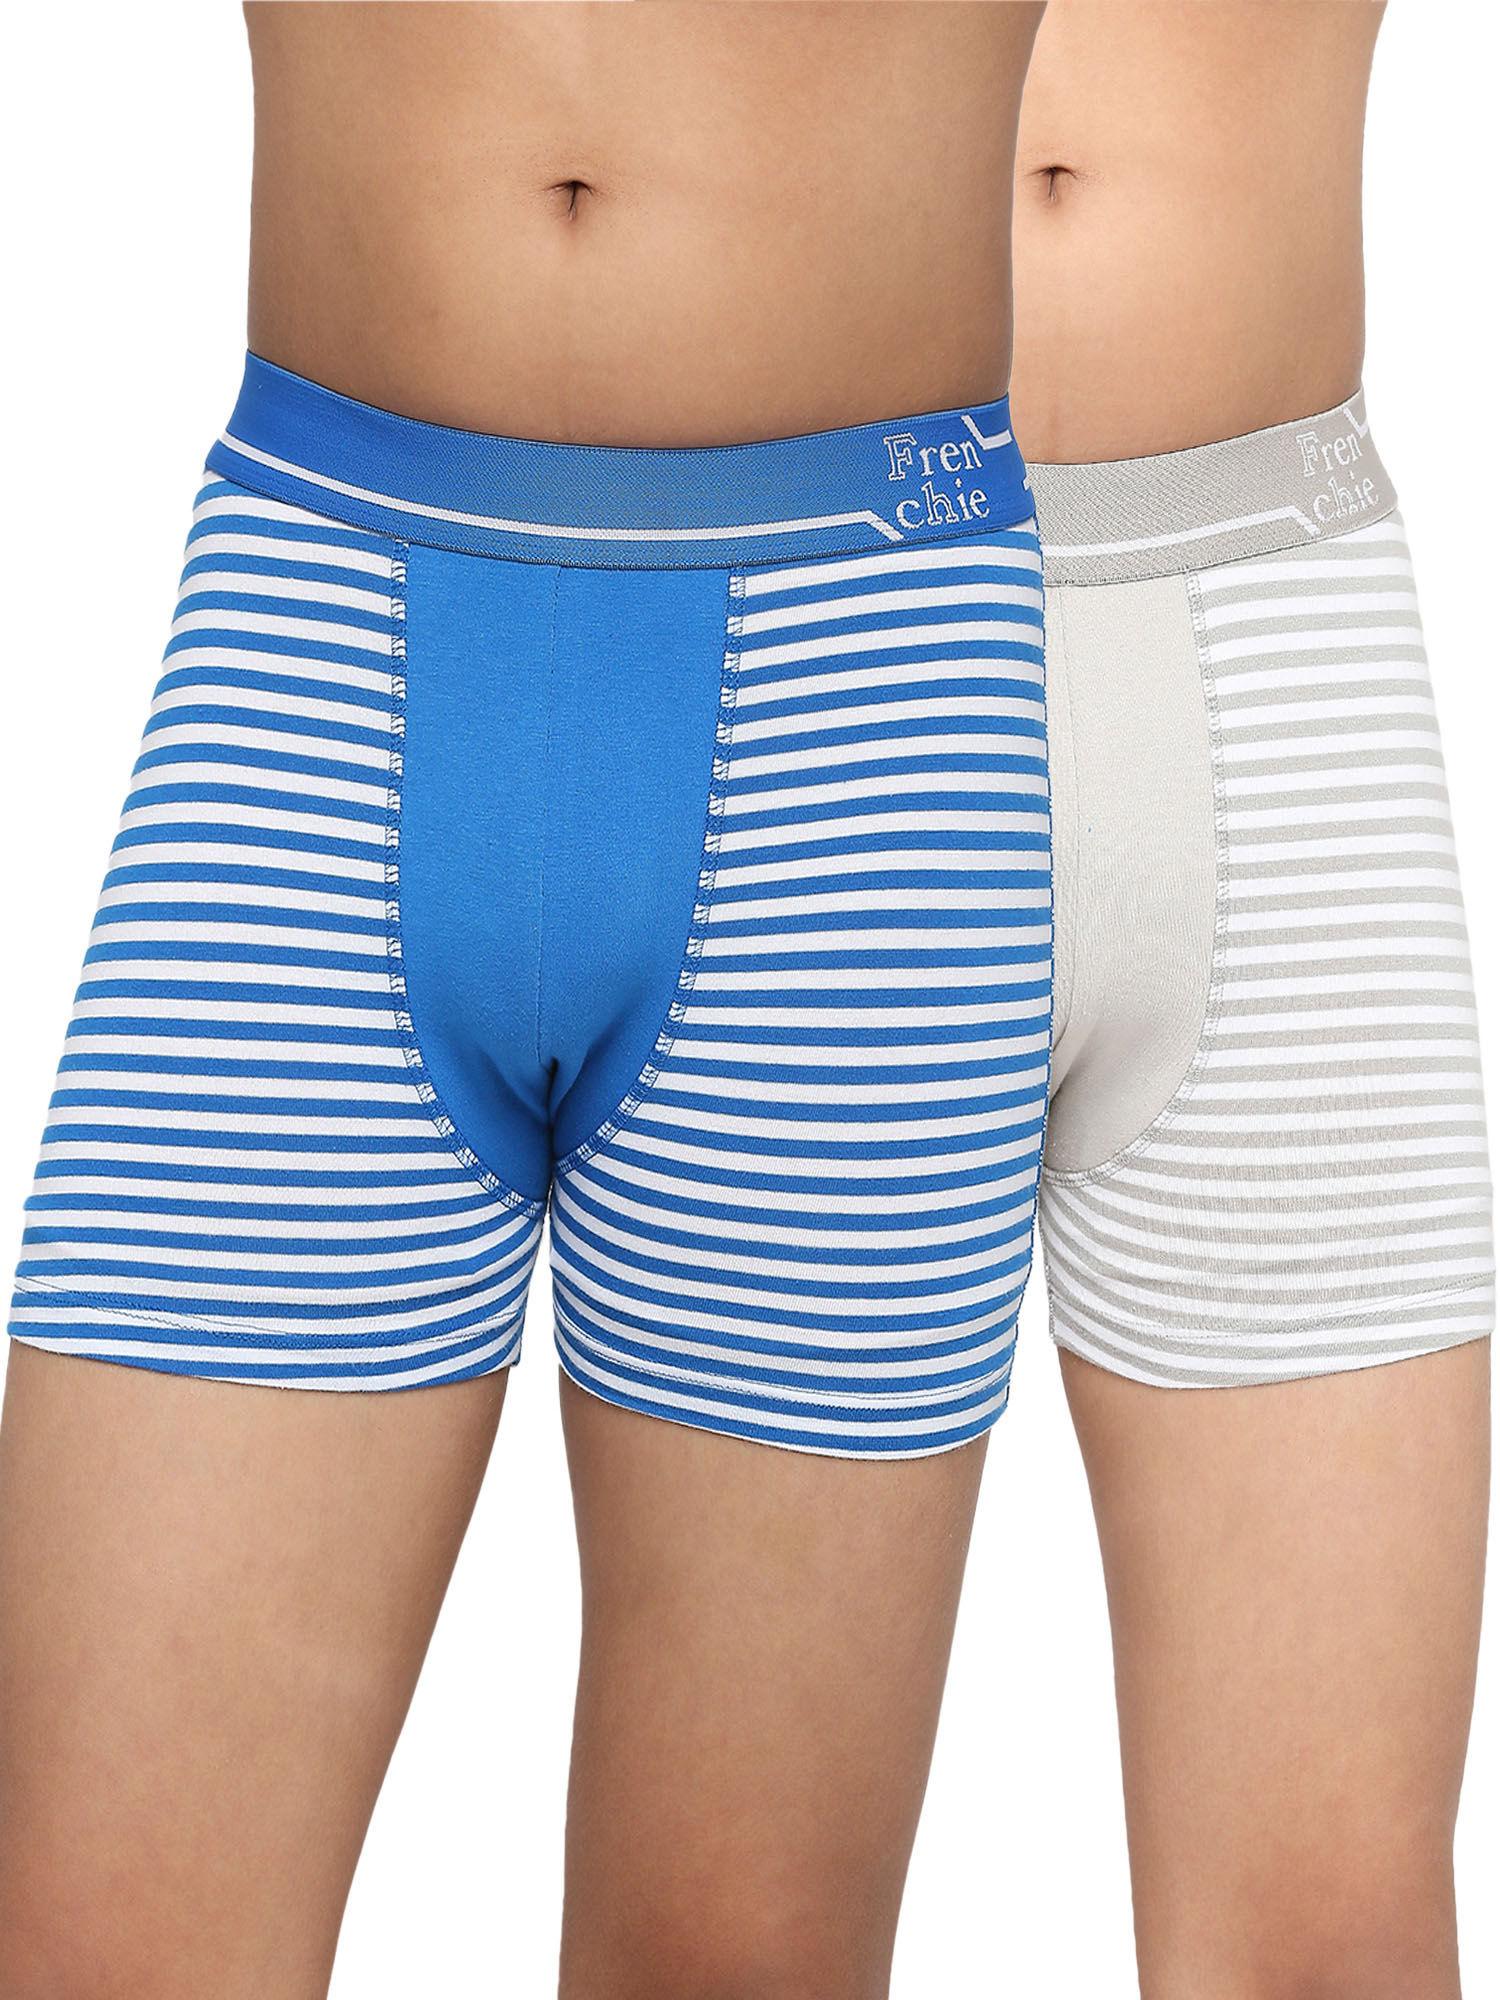 teenagers cotton trunk grey and blue (pack of 2)